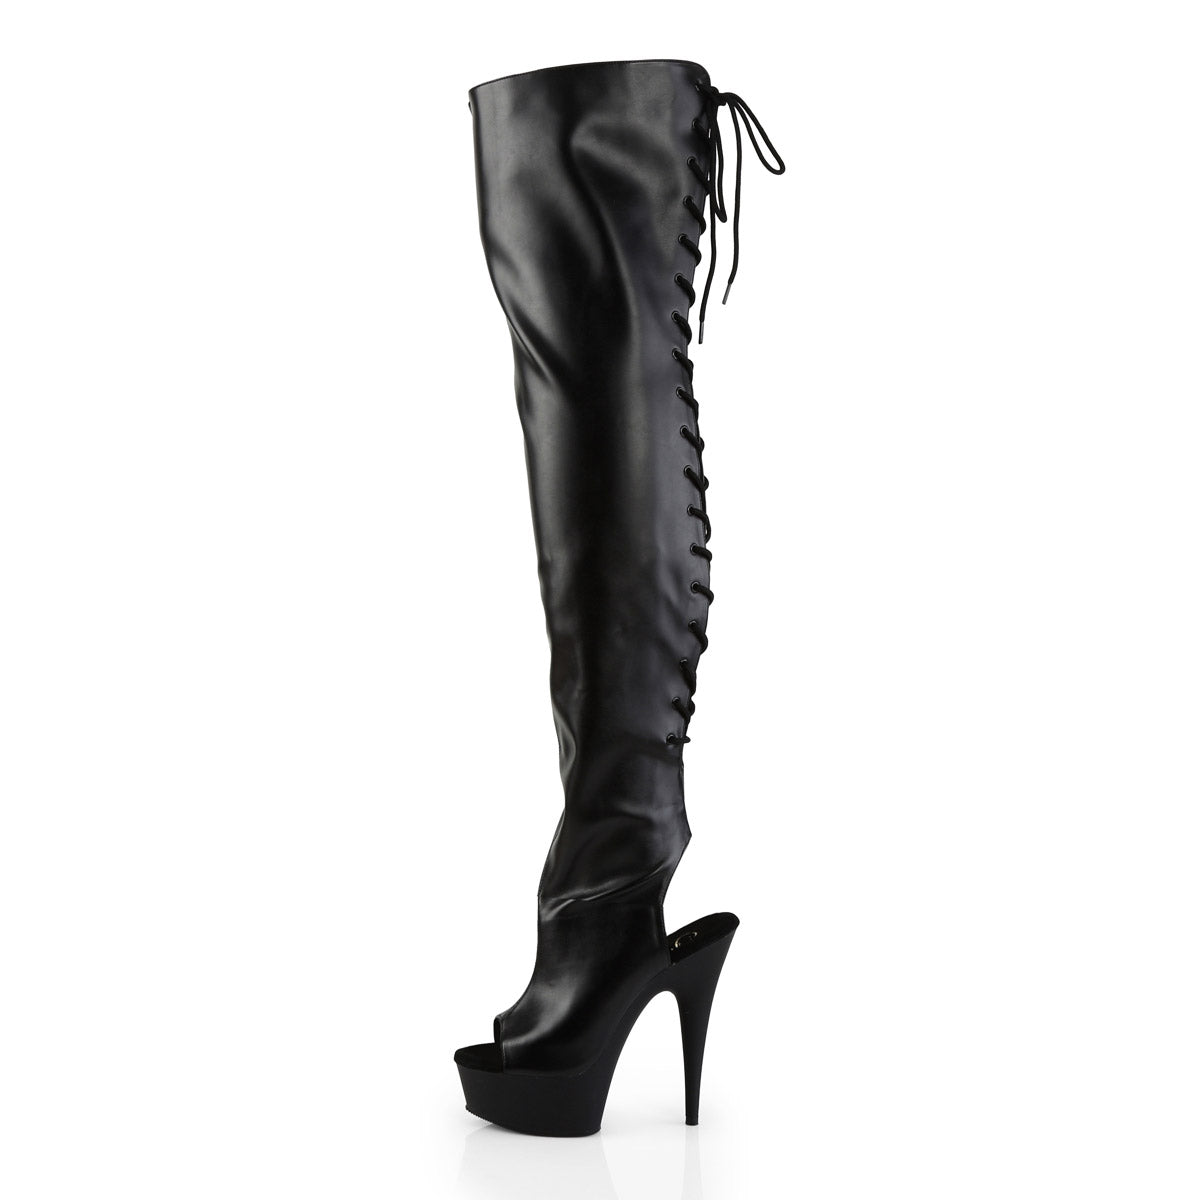 Lace Up Back Thigh High Zip Side Platform Stiletto Heel Boots Shoes Pleaser Pleaser DELIGHT/3017